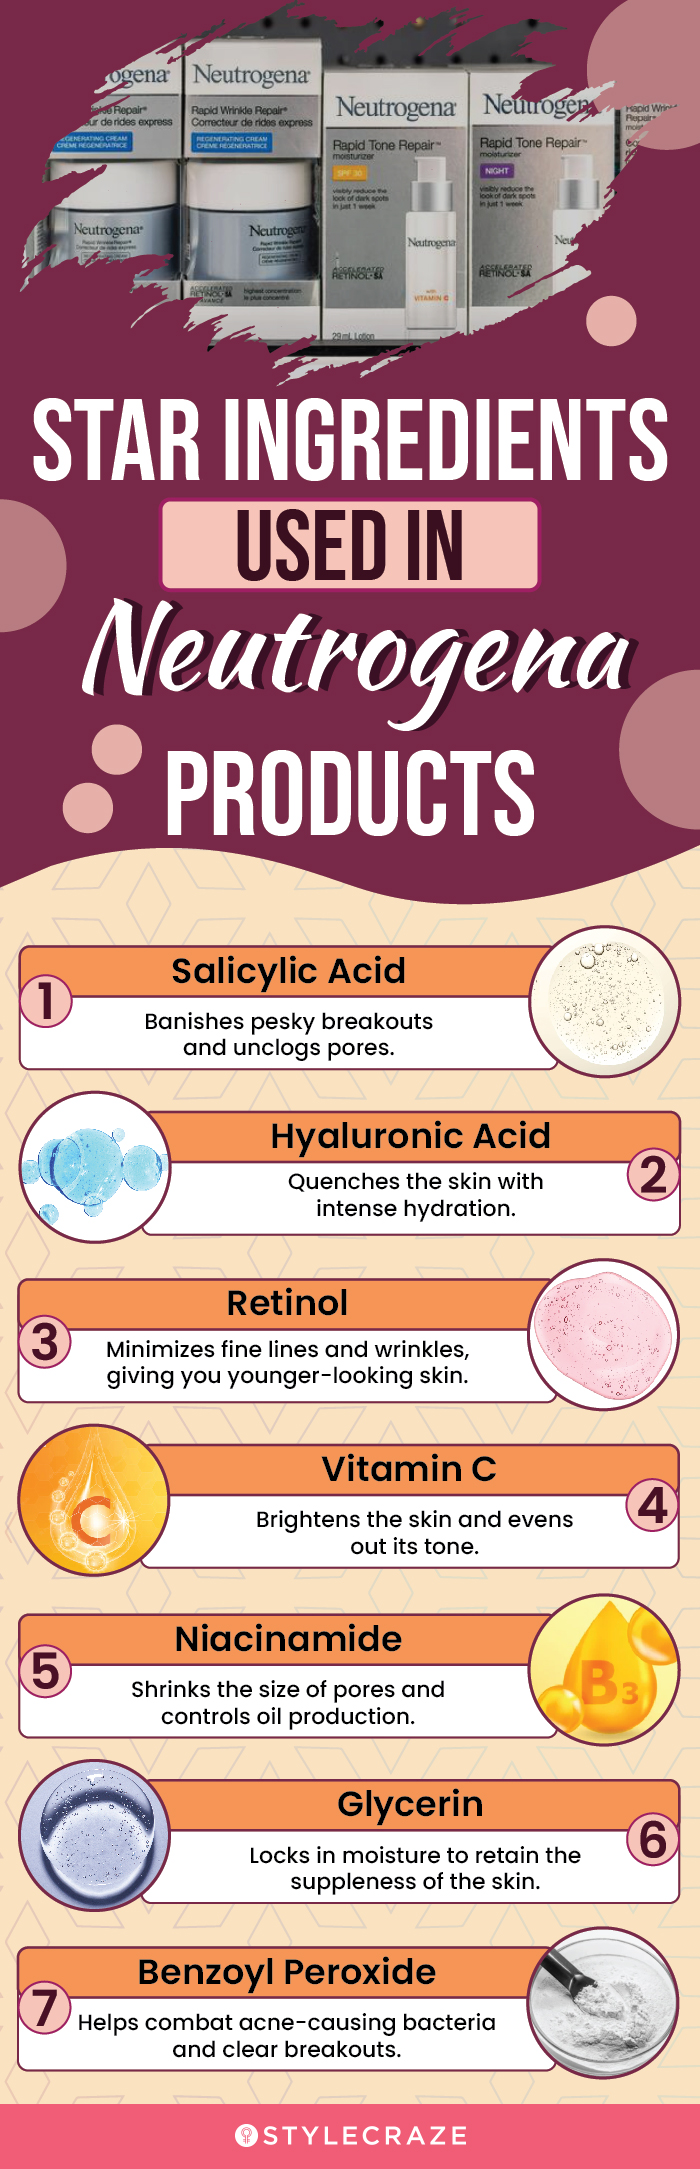 Star Ingredients Used In Neutrogena Products (infographic)